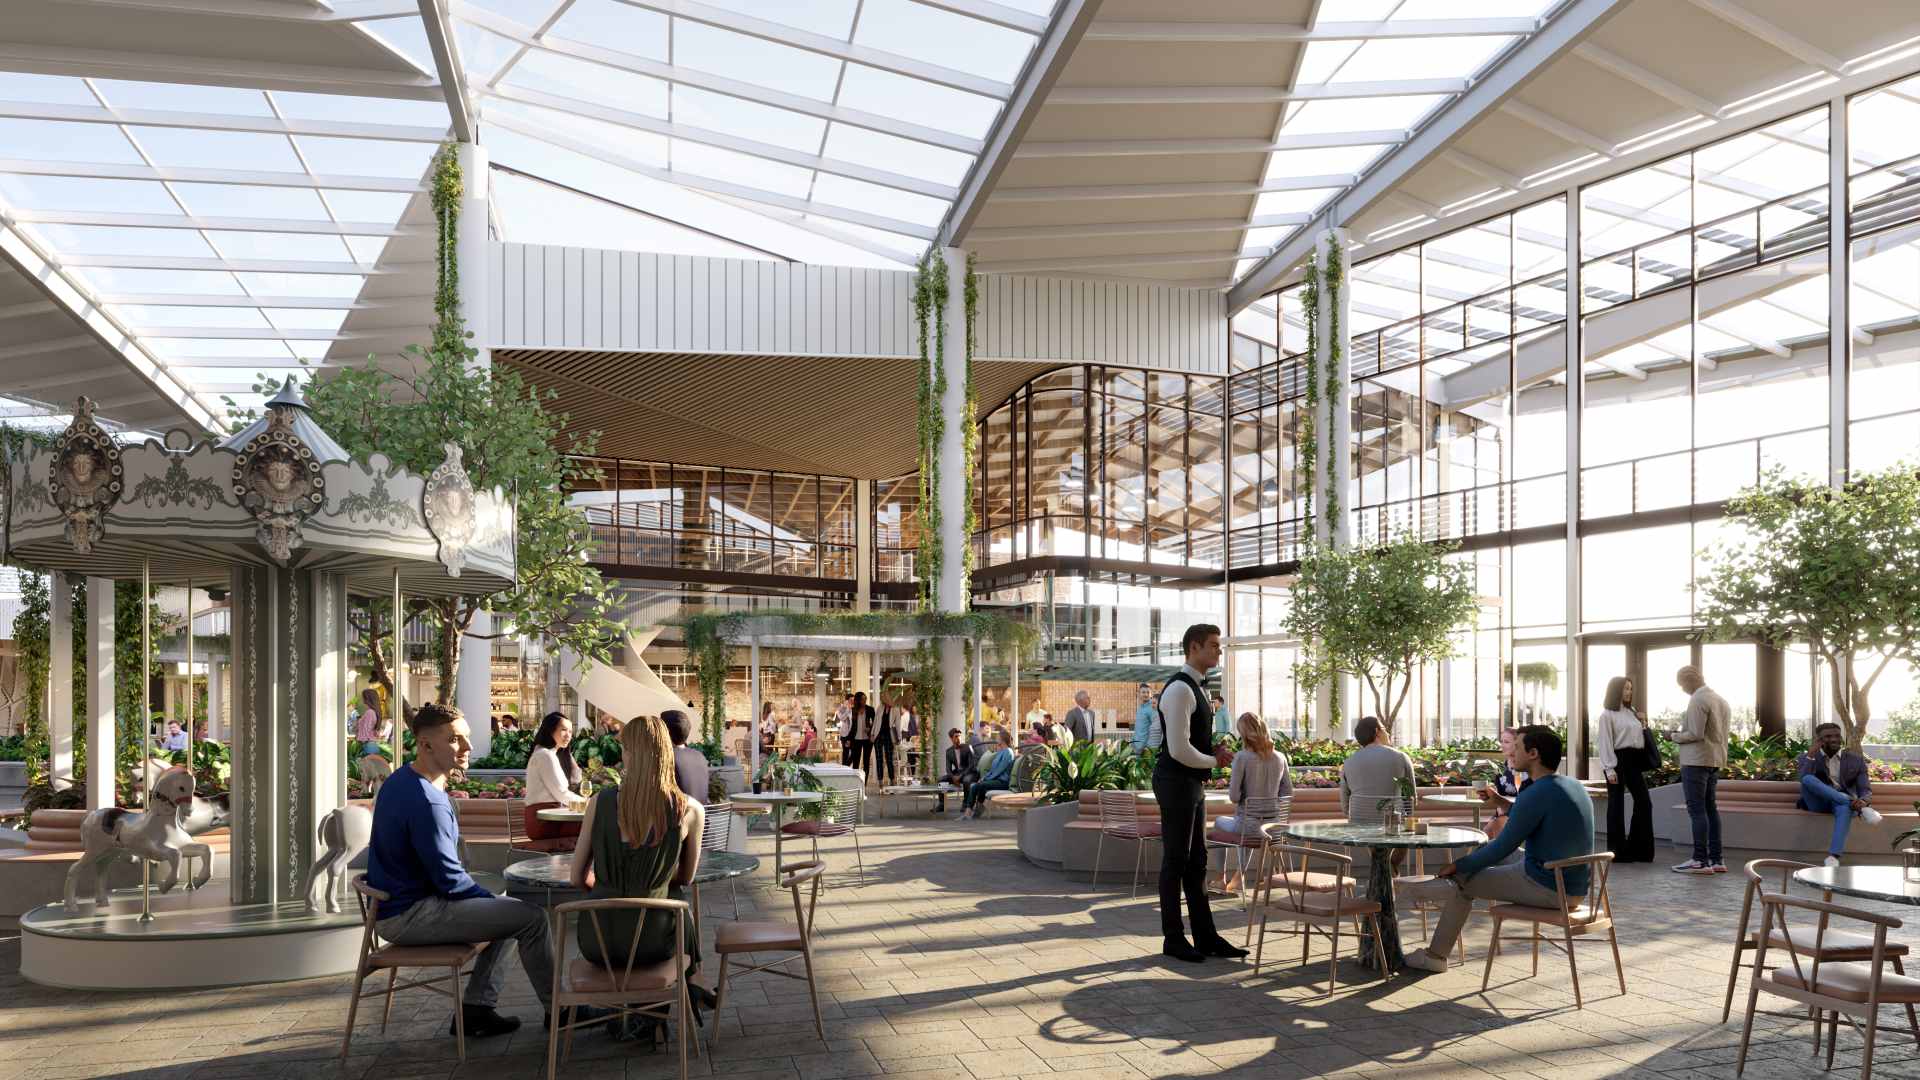 Chadstone Is Launching a New $71 Million Entertainment and Dining Precinct This Summer